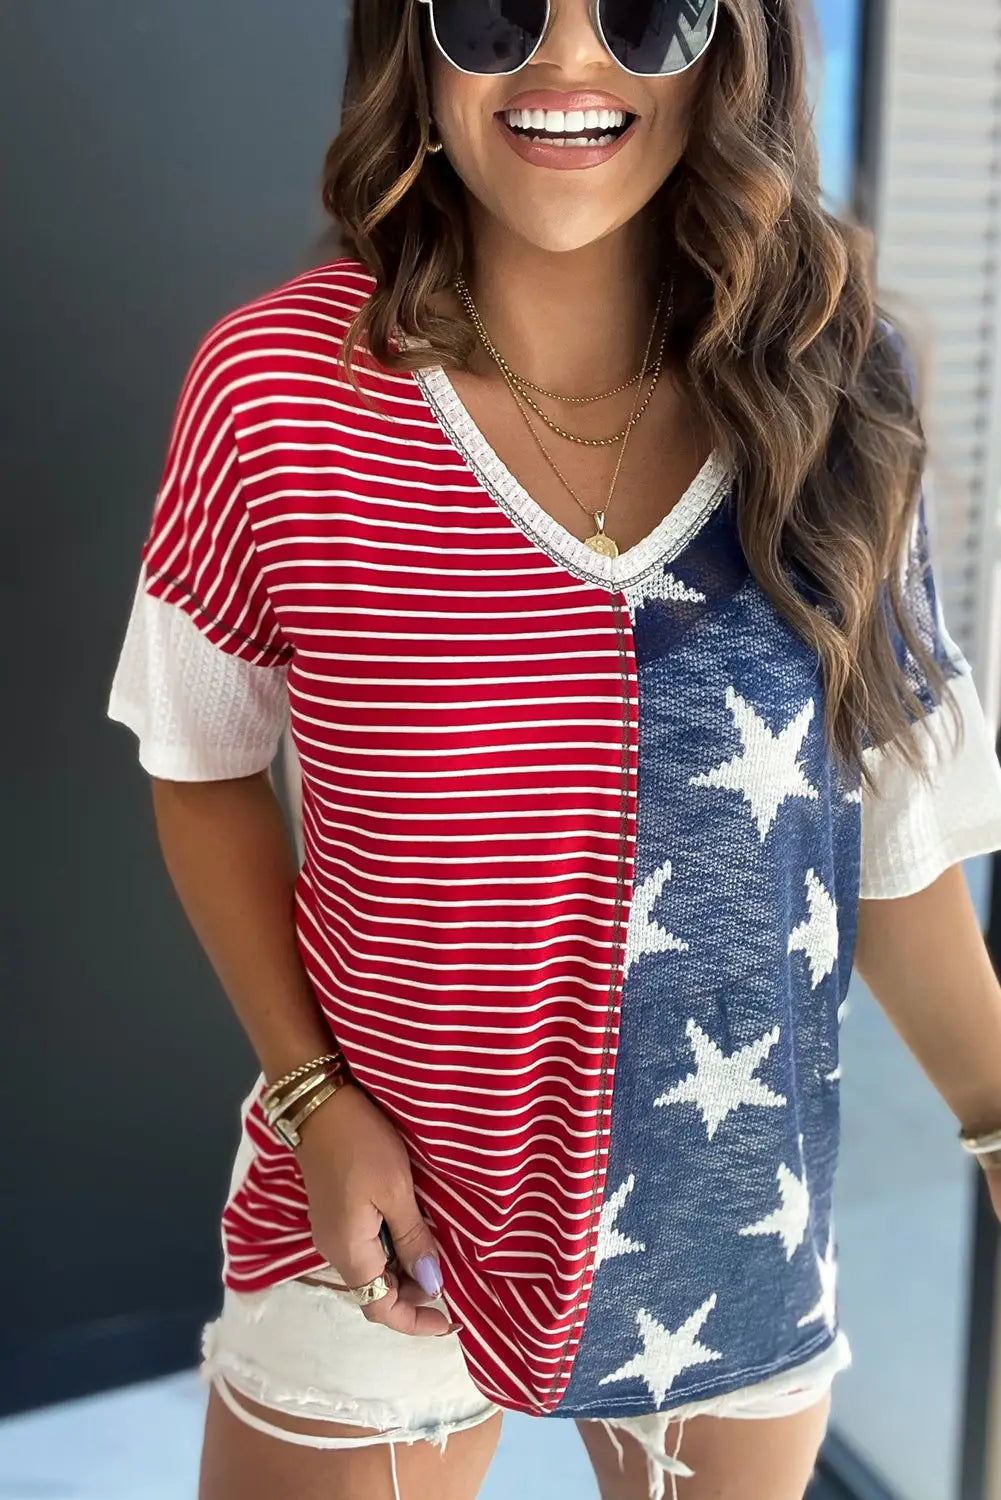 Red american flag stars and stripes tank top - tops